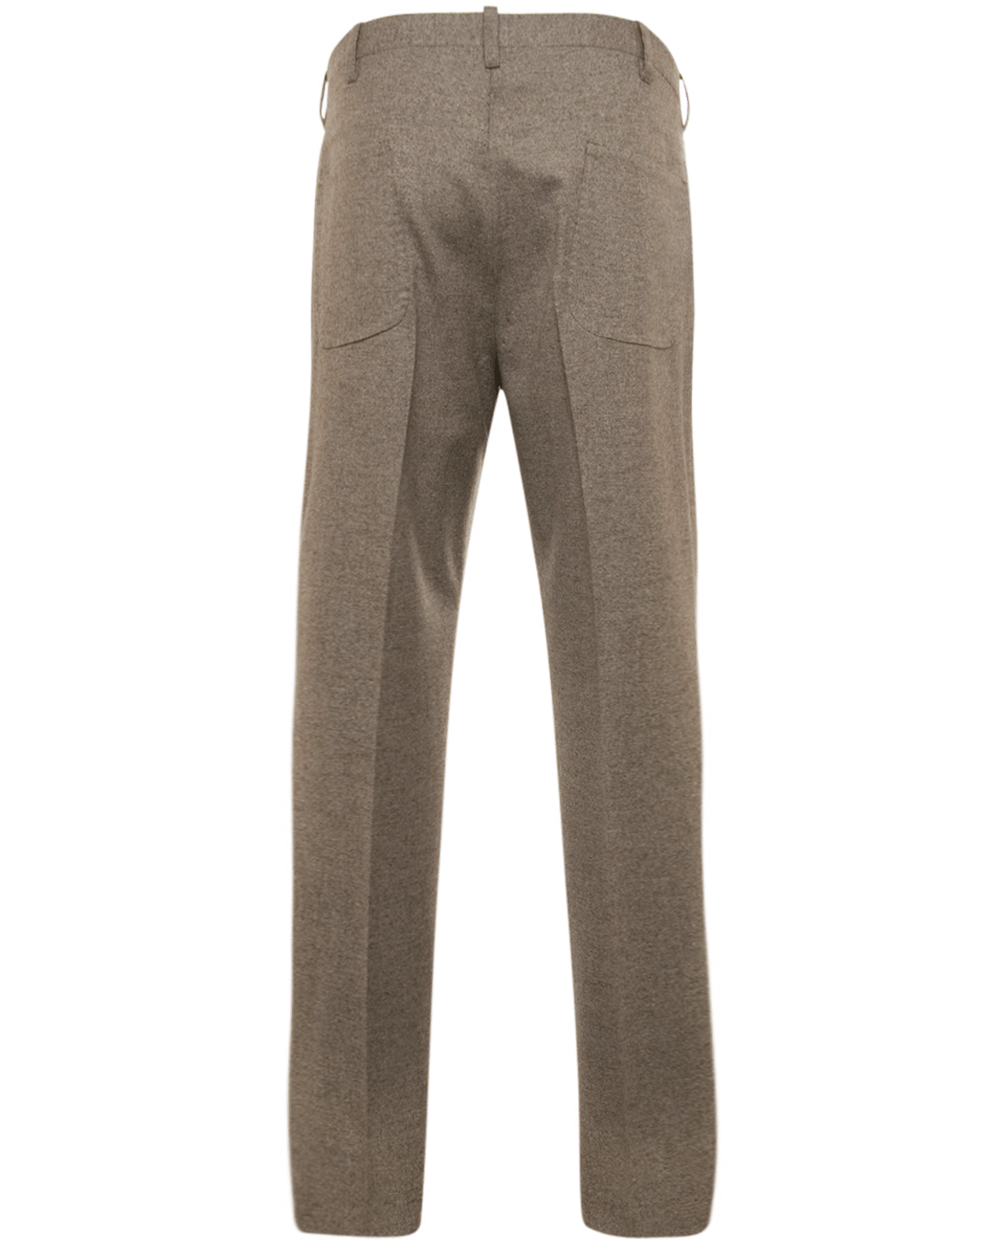 Oatmeal Wool Donegal Pant